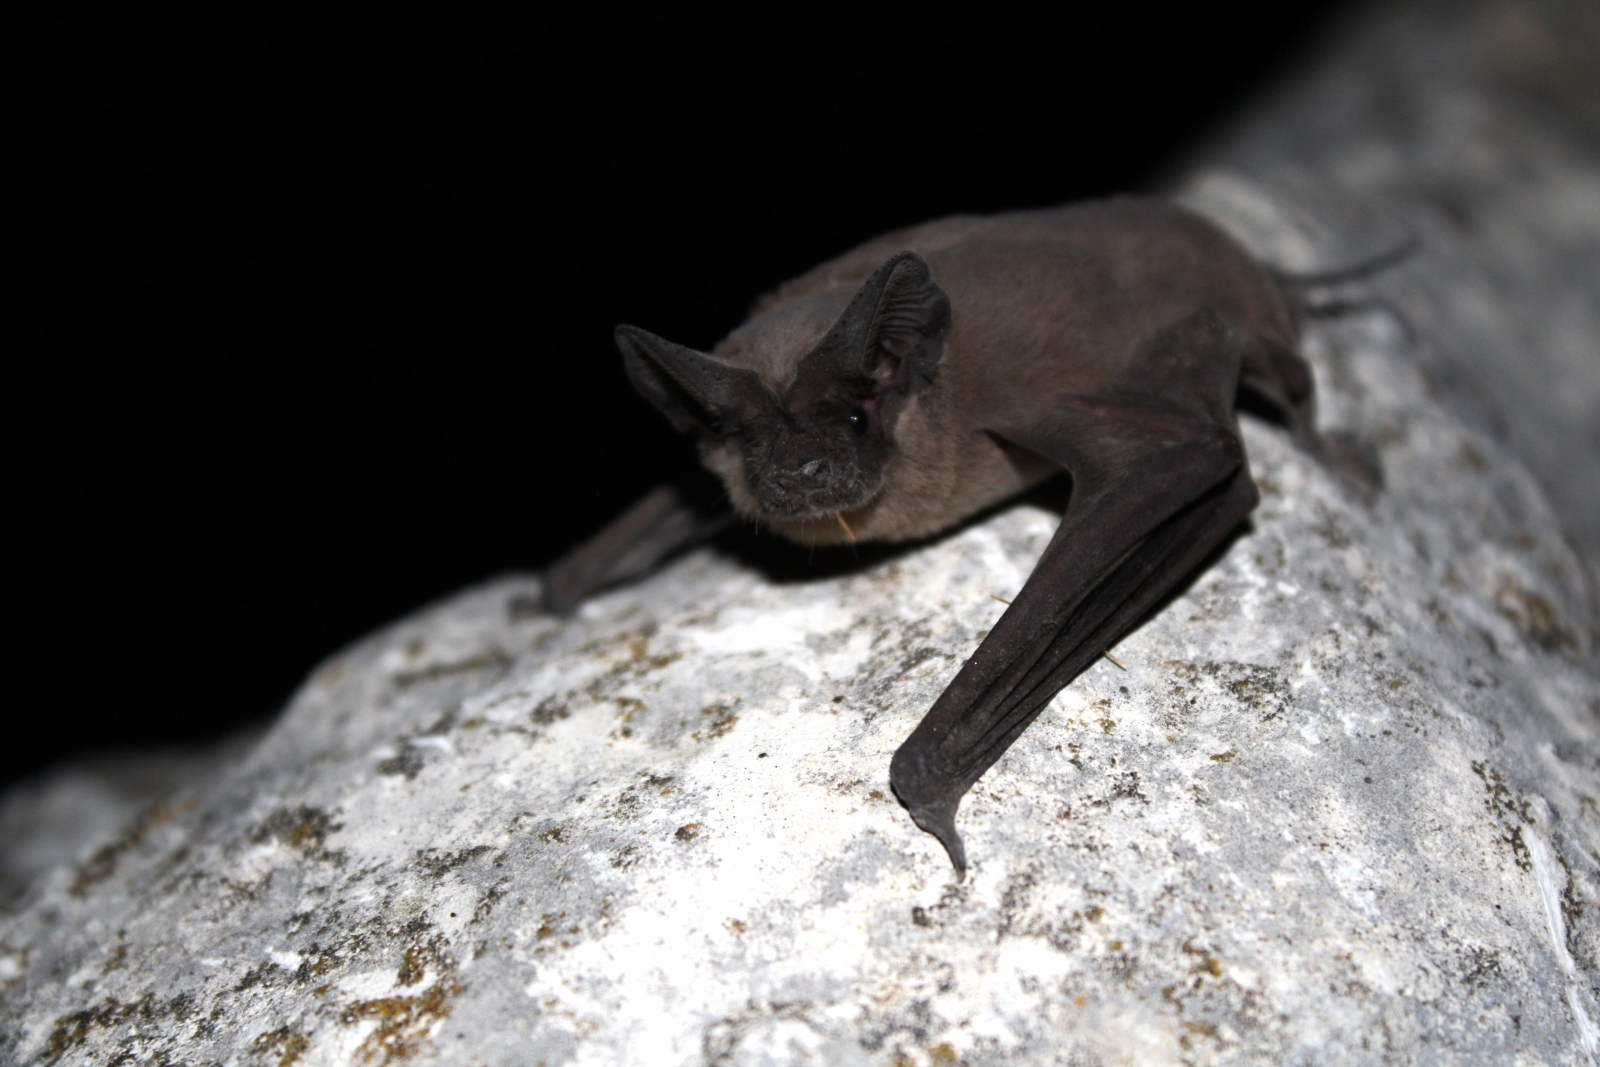 Ebola: Children playing near free-tailed bat nest caused worst outbreak in history1600 x 1067